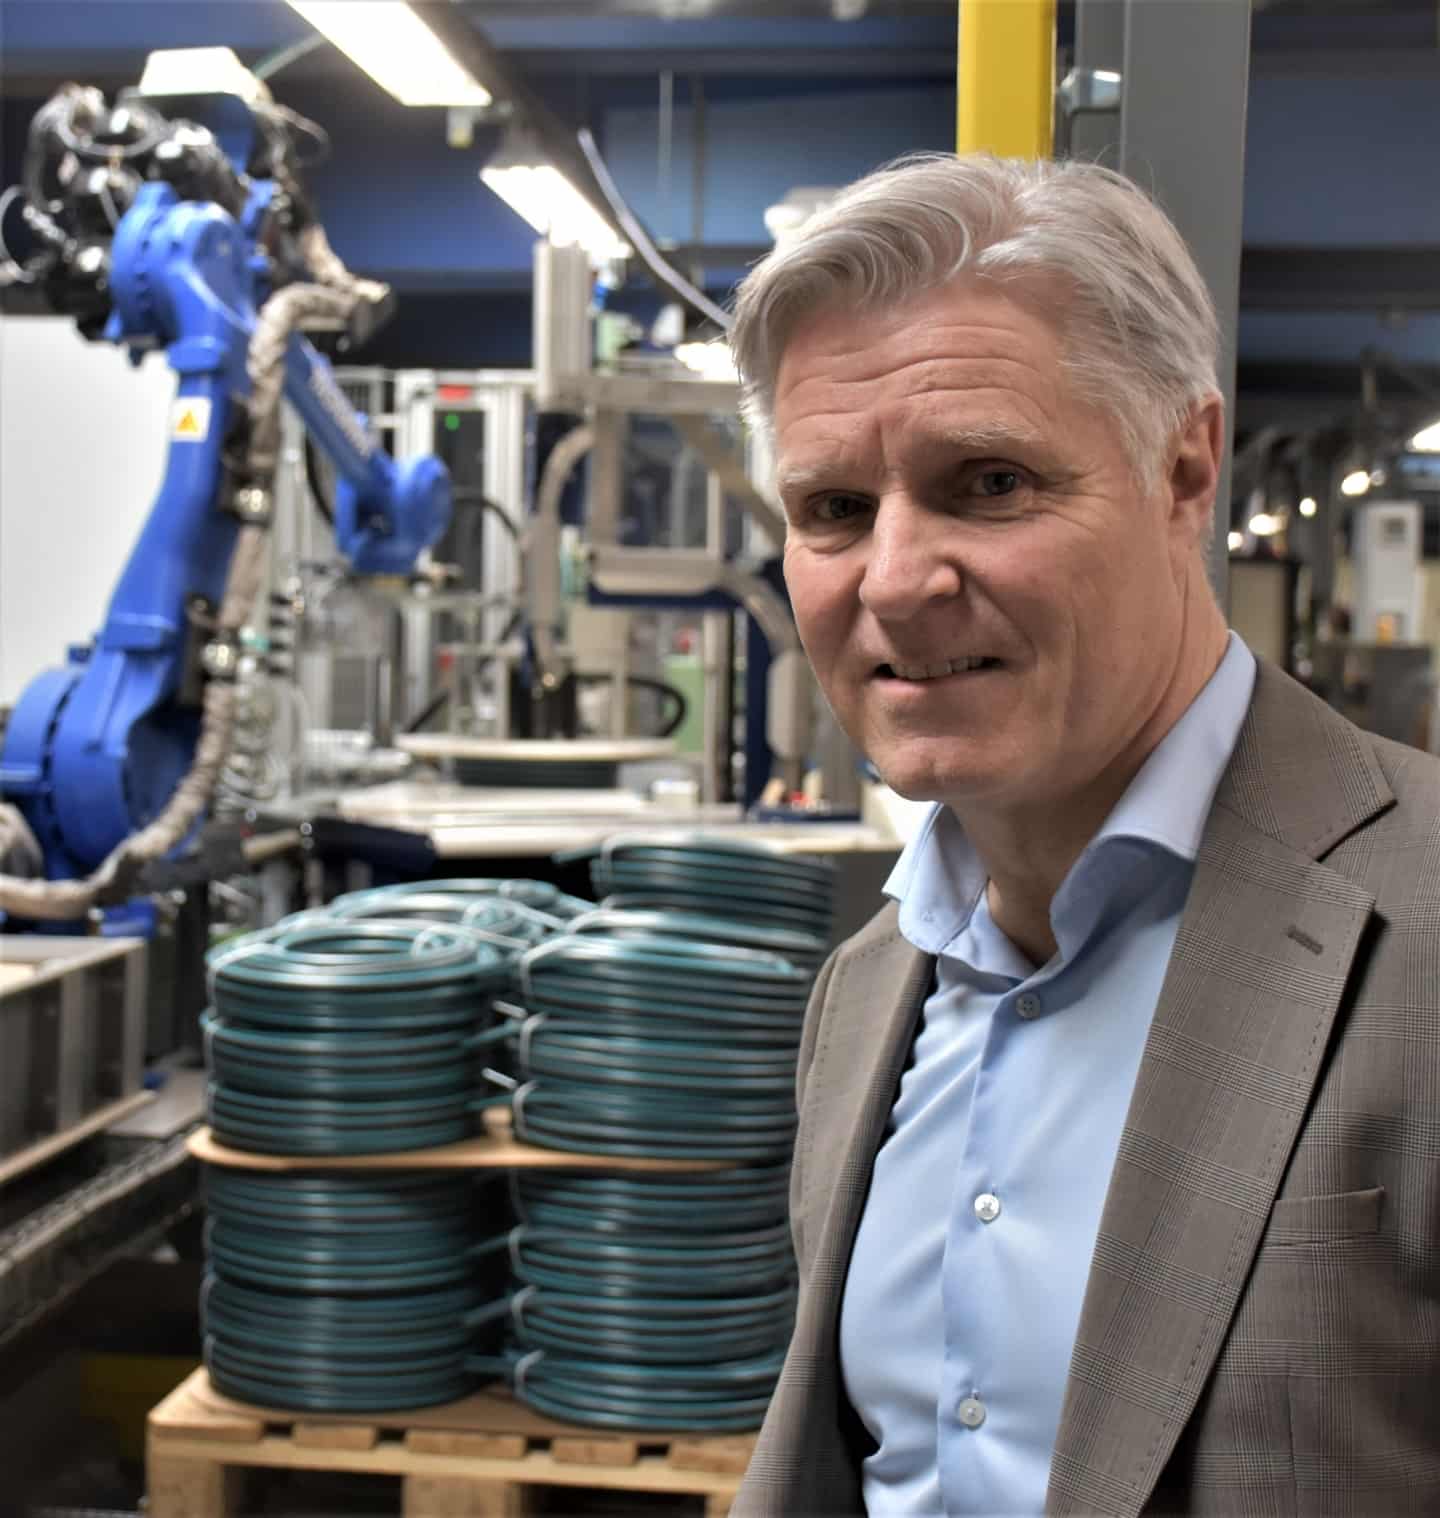 More robots is the way forward in Ribe: New CEO wants to digitize family business for more growth